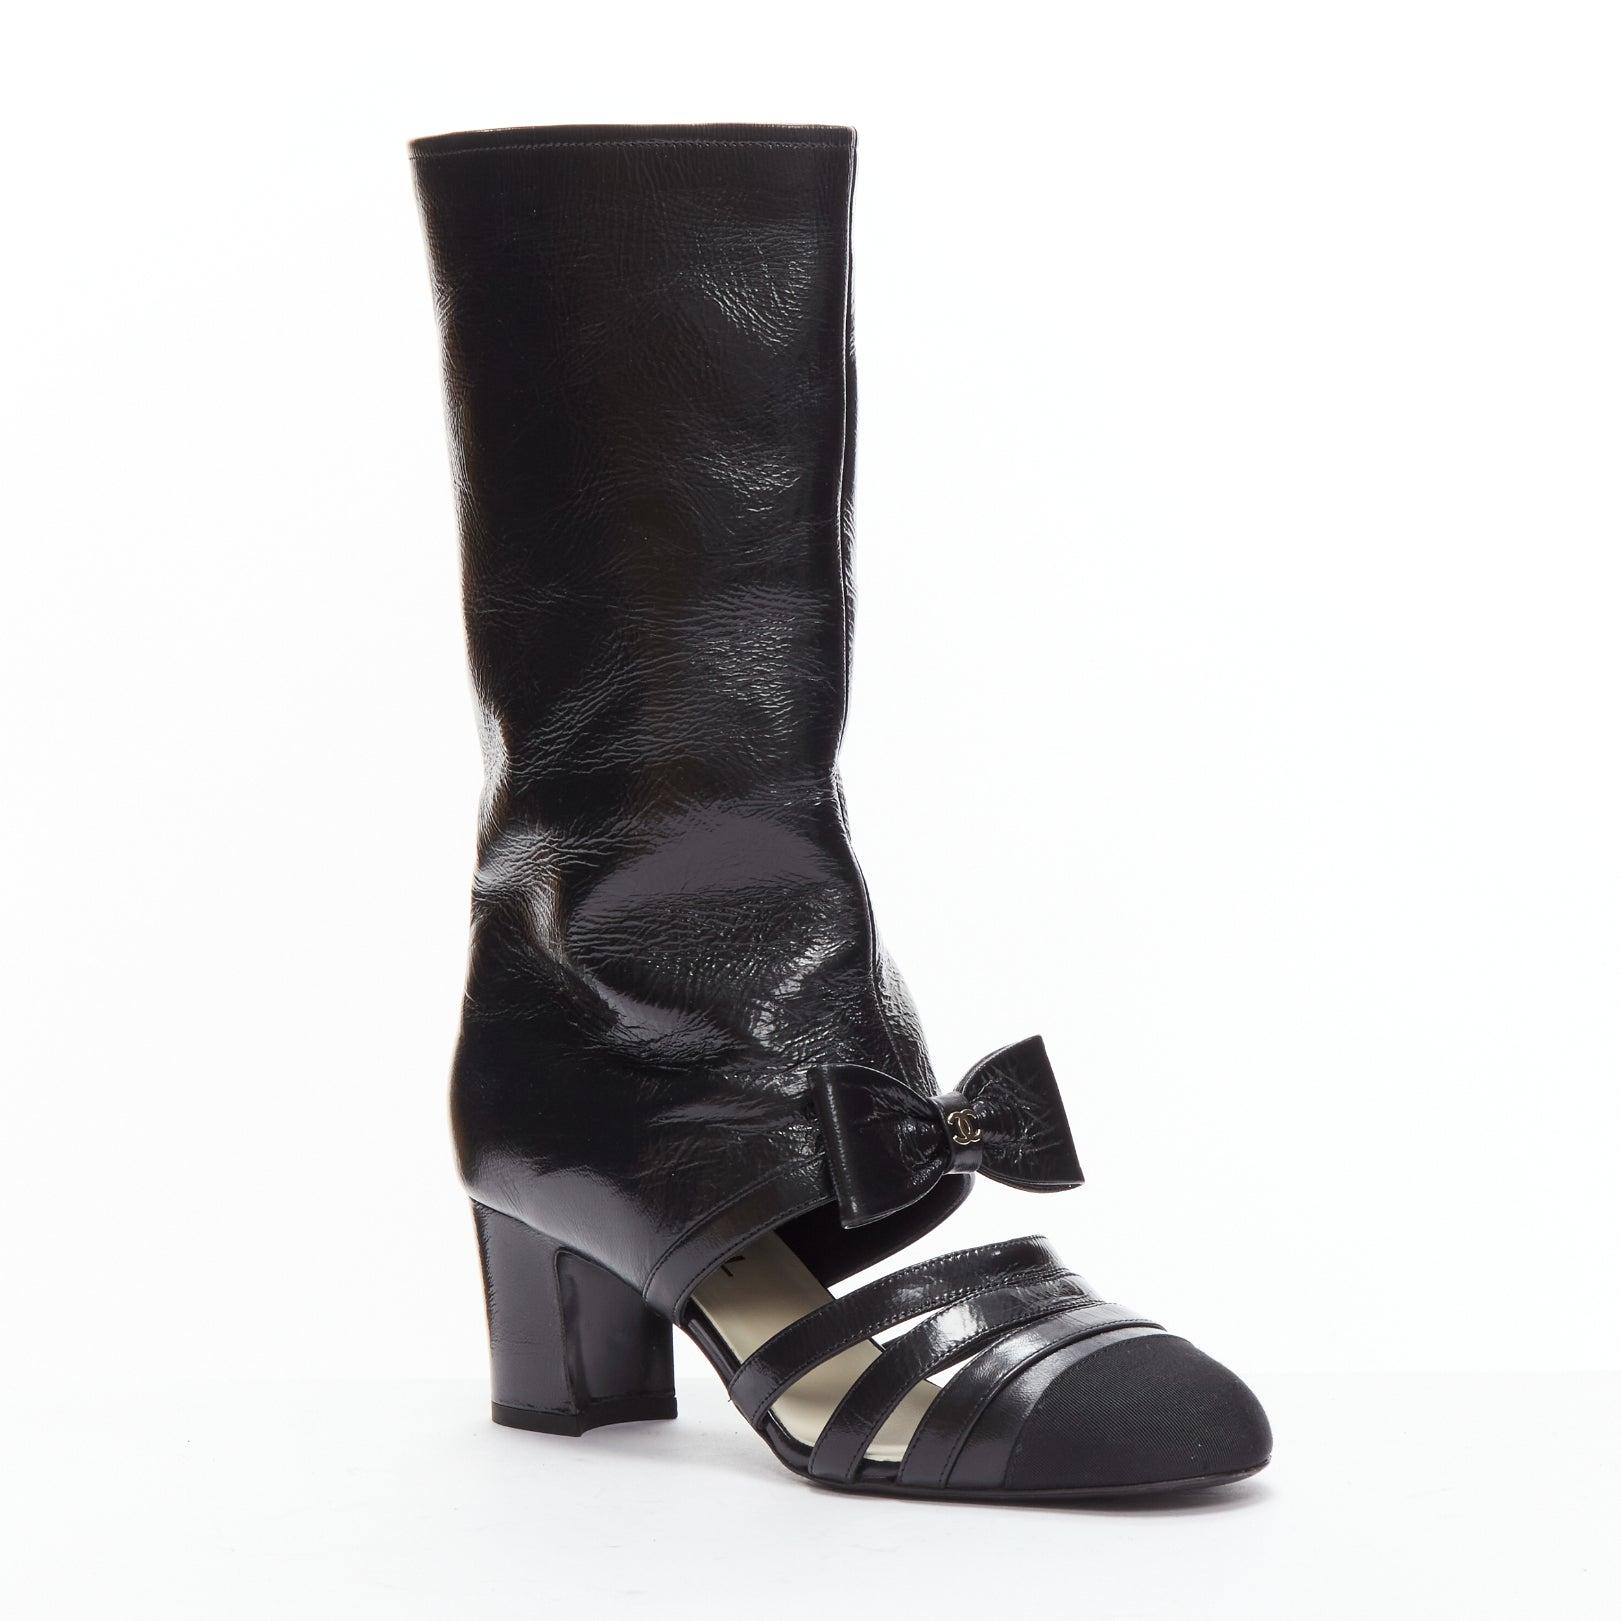 CHANEL 2023 Runway silver CC bow black leather cut out boots EU38.5
Reference: AAWC/A00554
Brand: Chanel
Designer: Virginie Viard
Collection: S/S 2023 - Runway
Material: Leather, Fabric
Color: Silver, Black
Pattern: Solid
Closure: Pull On
Lining: